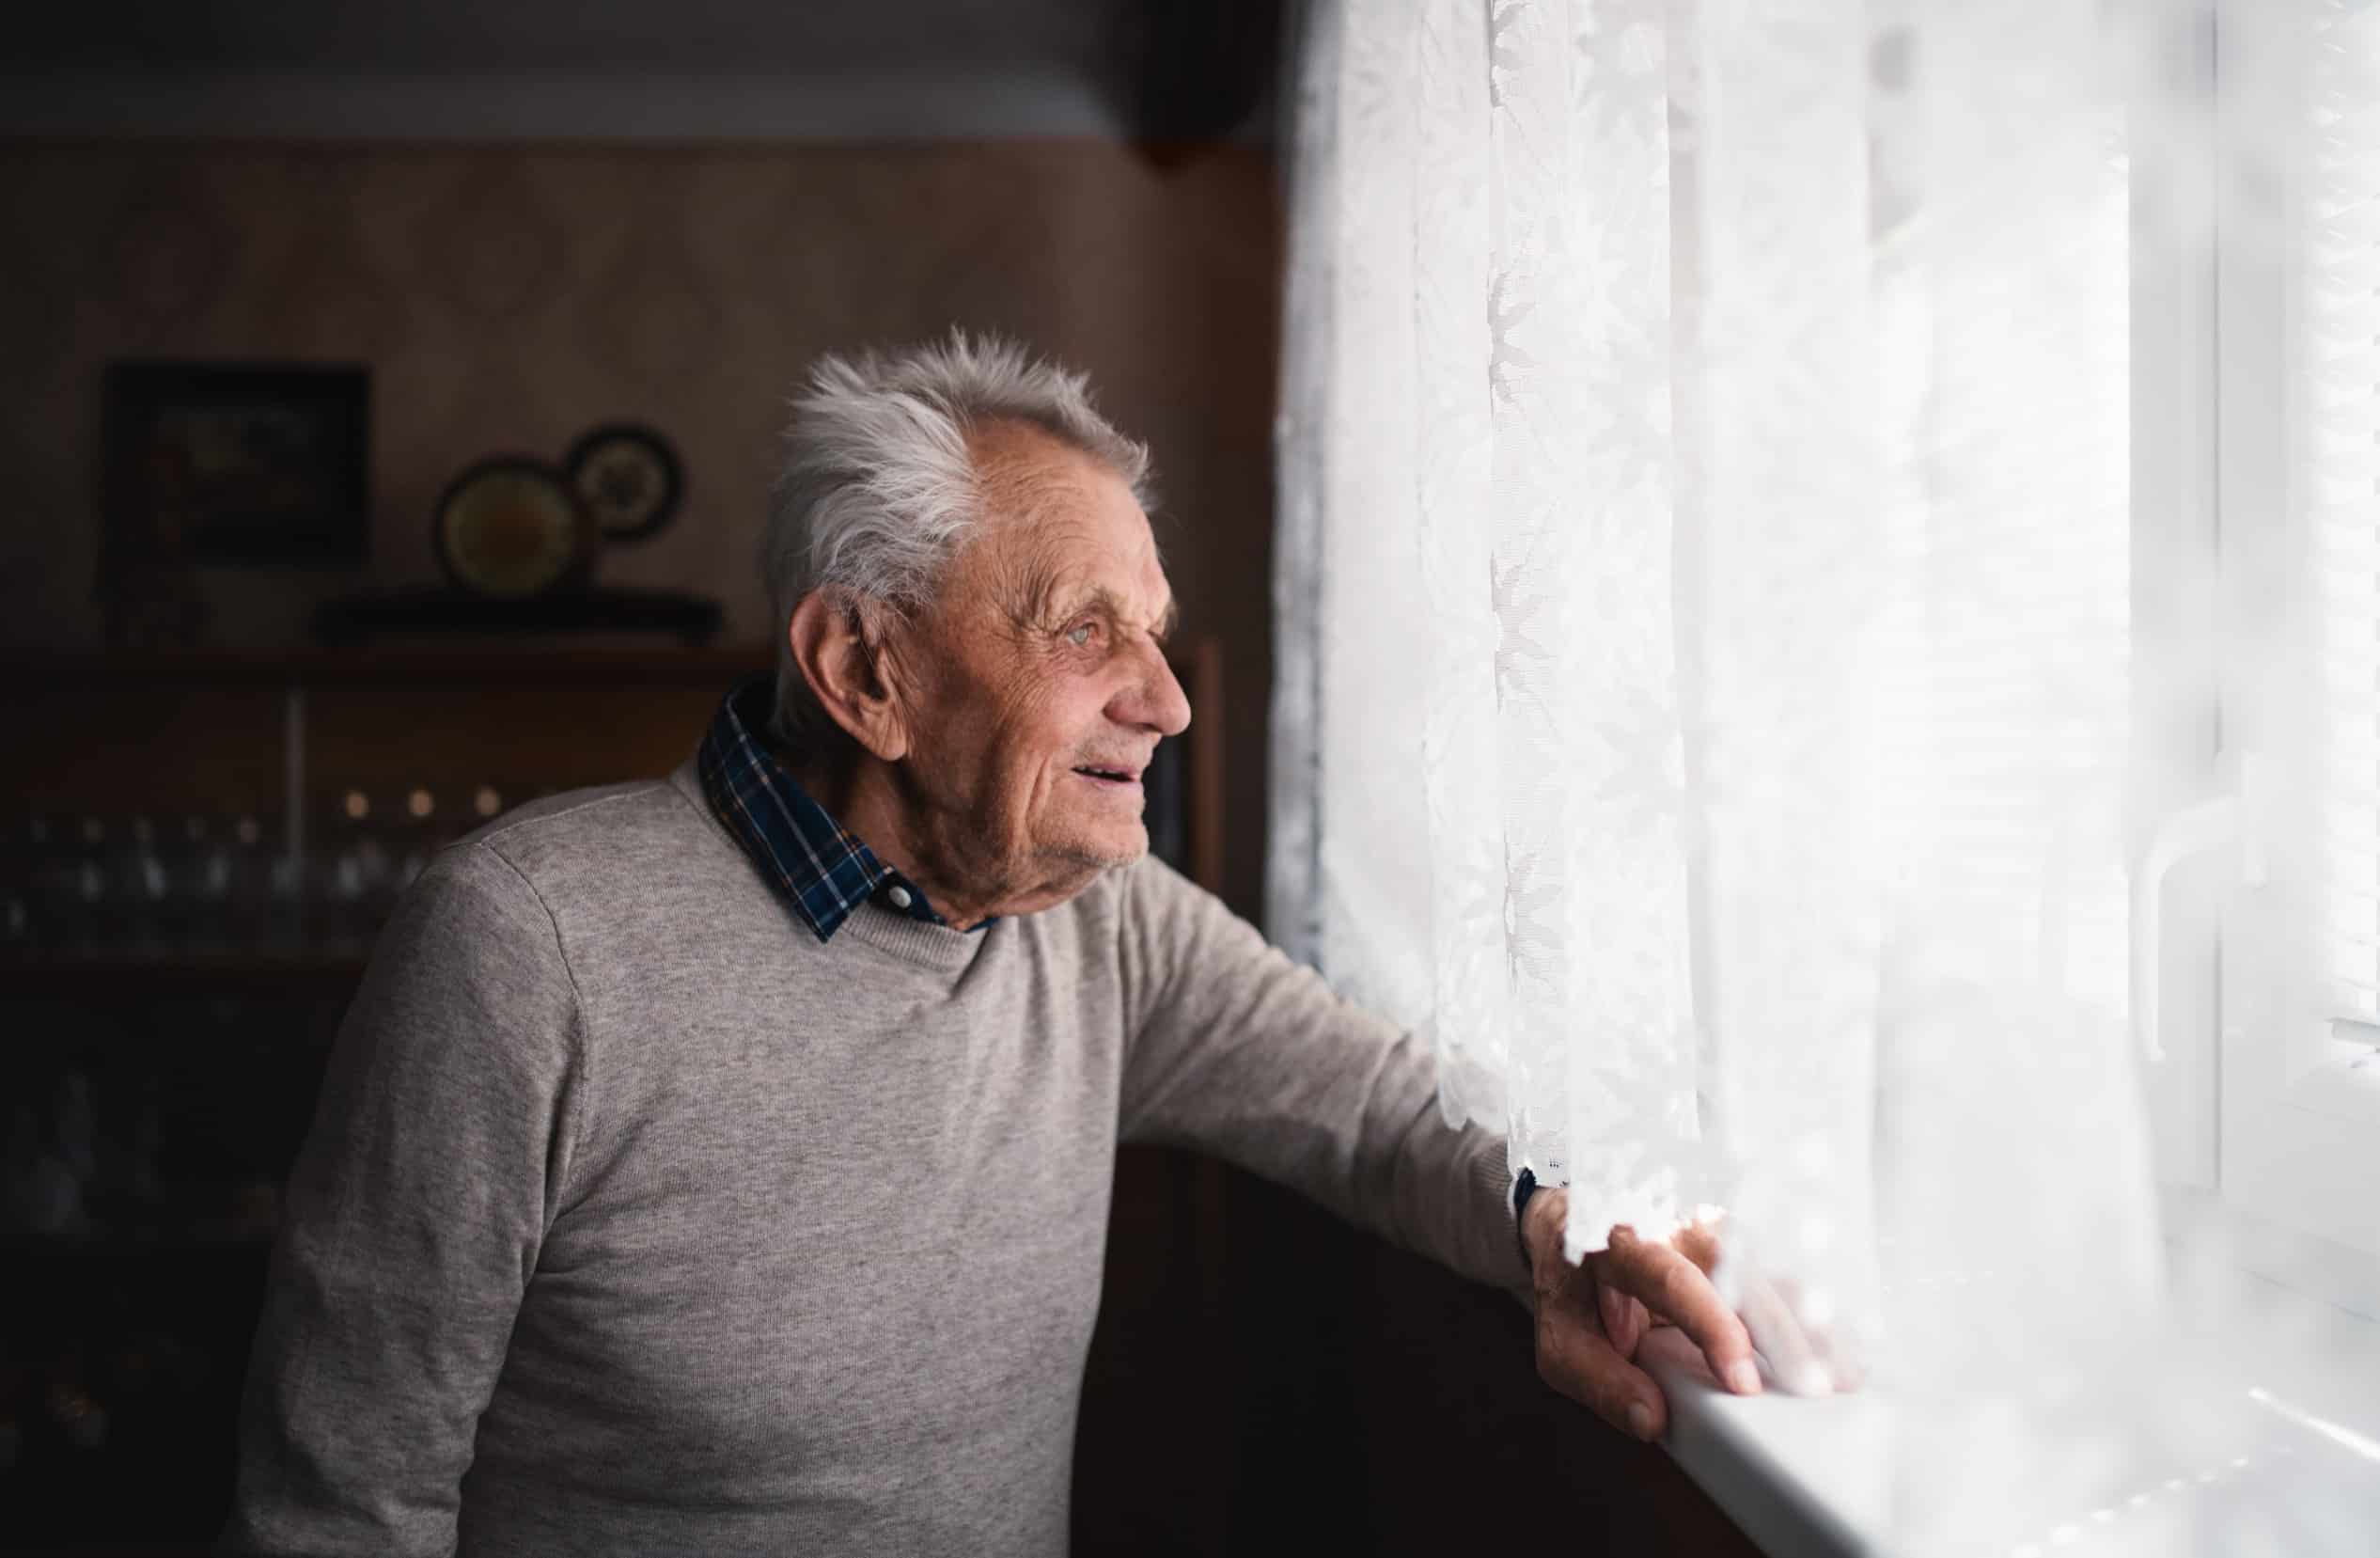 Photograph of elderly man standing indoors at home, looking out through window